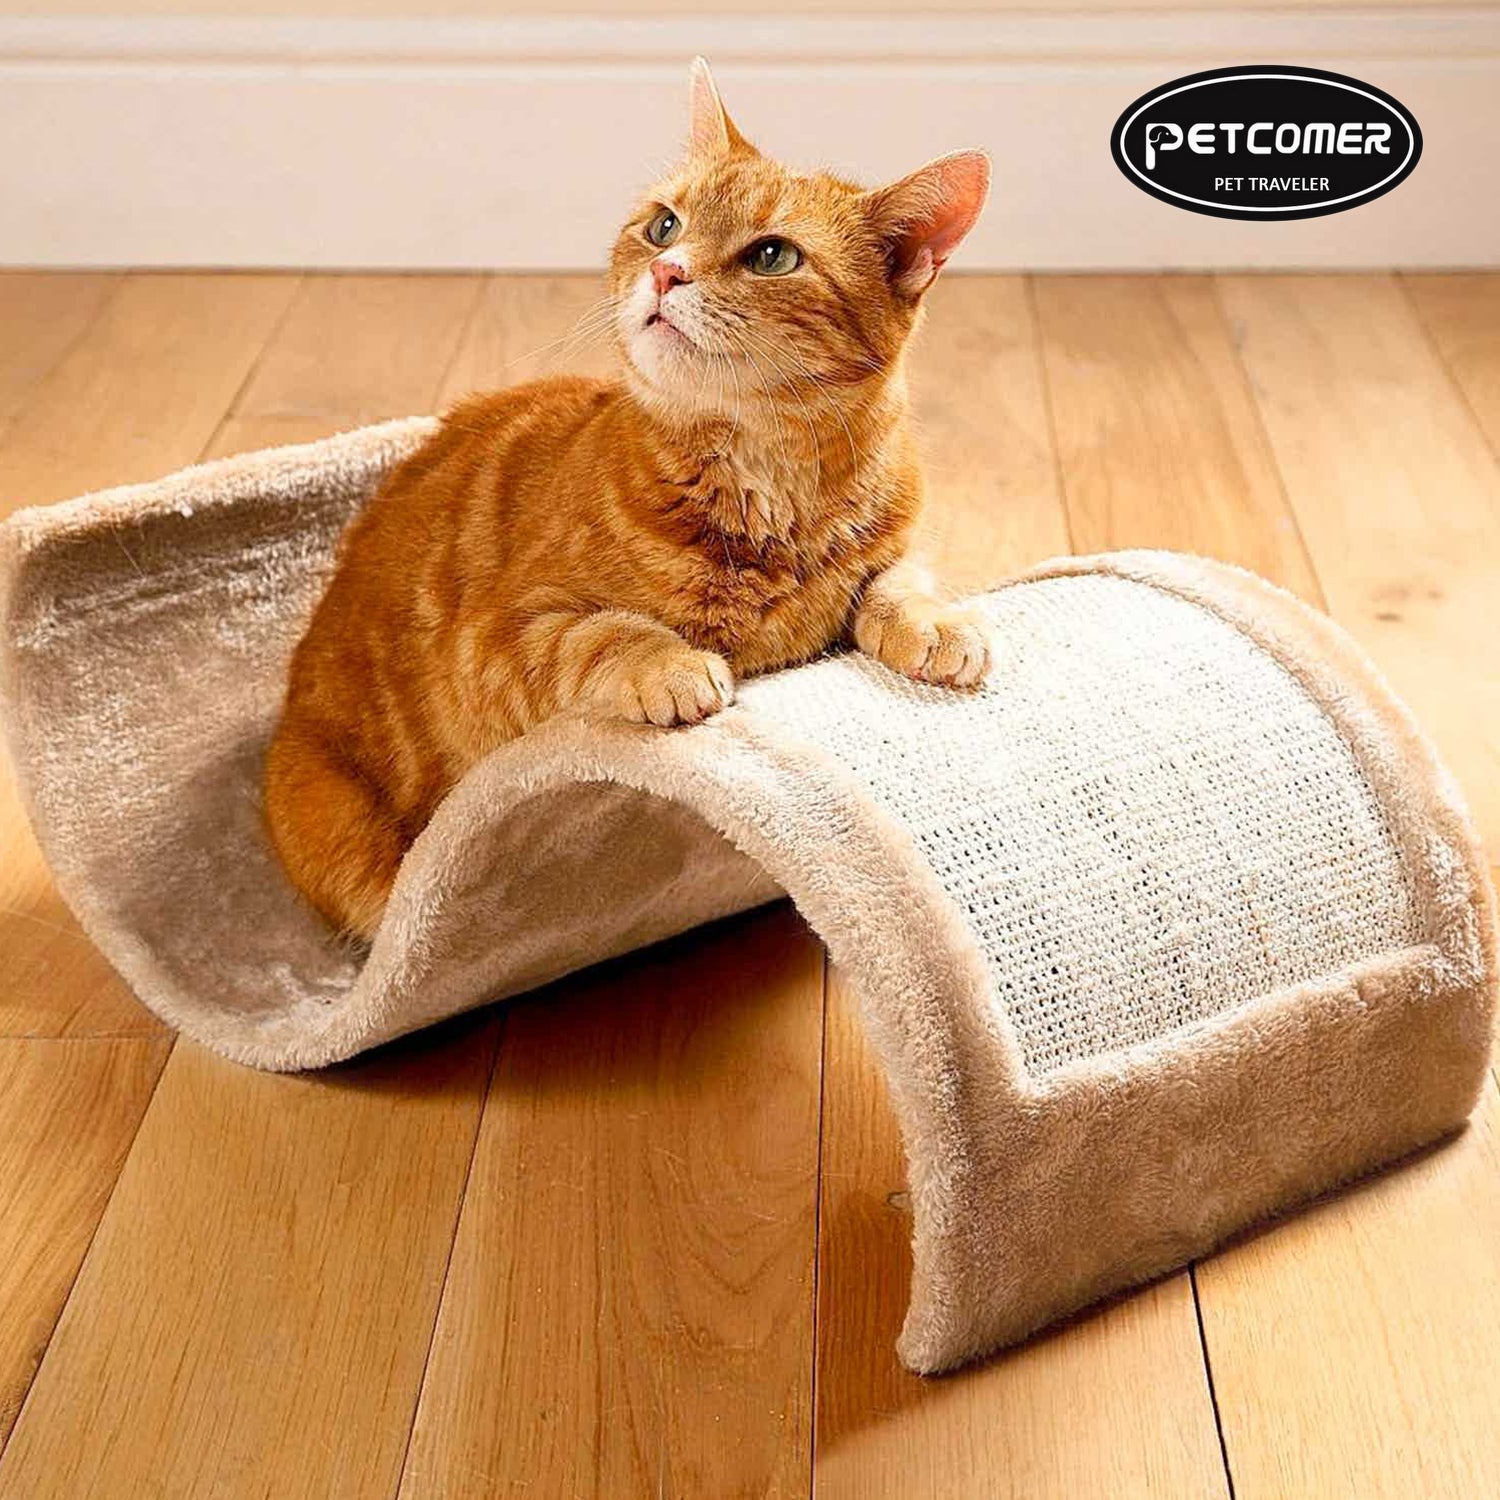 PETCOMER PET TRAVELER Cat Scratching Post Wave, Indoor Cat Toys and Bed & Pet Play Towers, Beige, 11.25"L x 19.5"W x 7"H